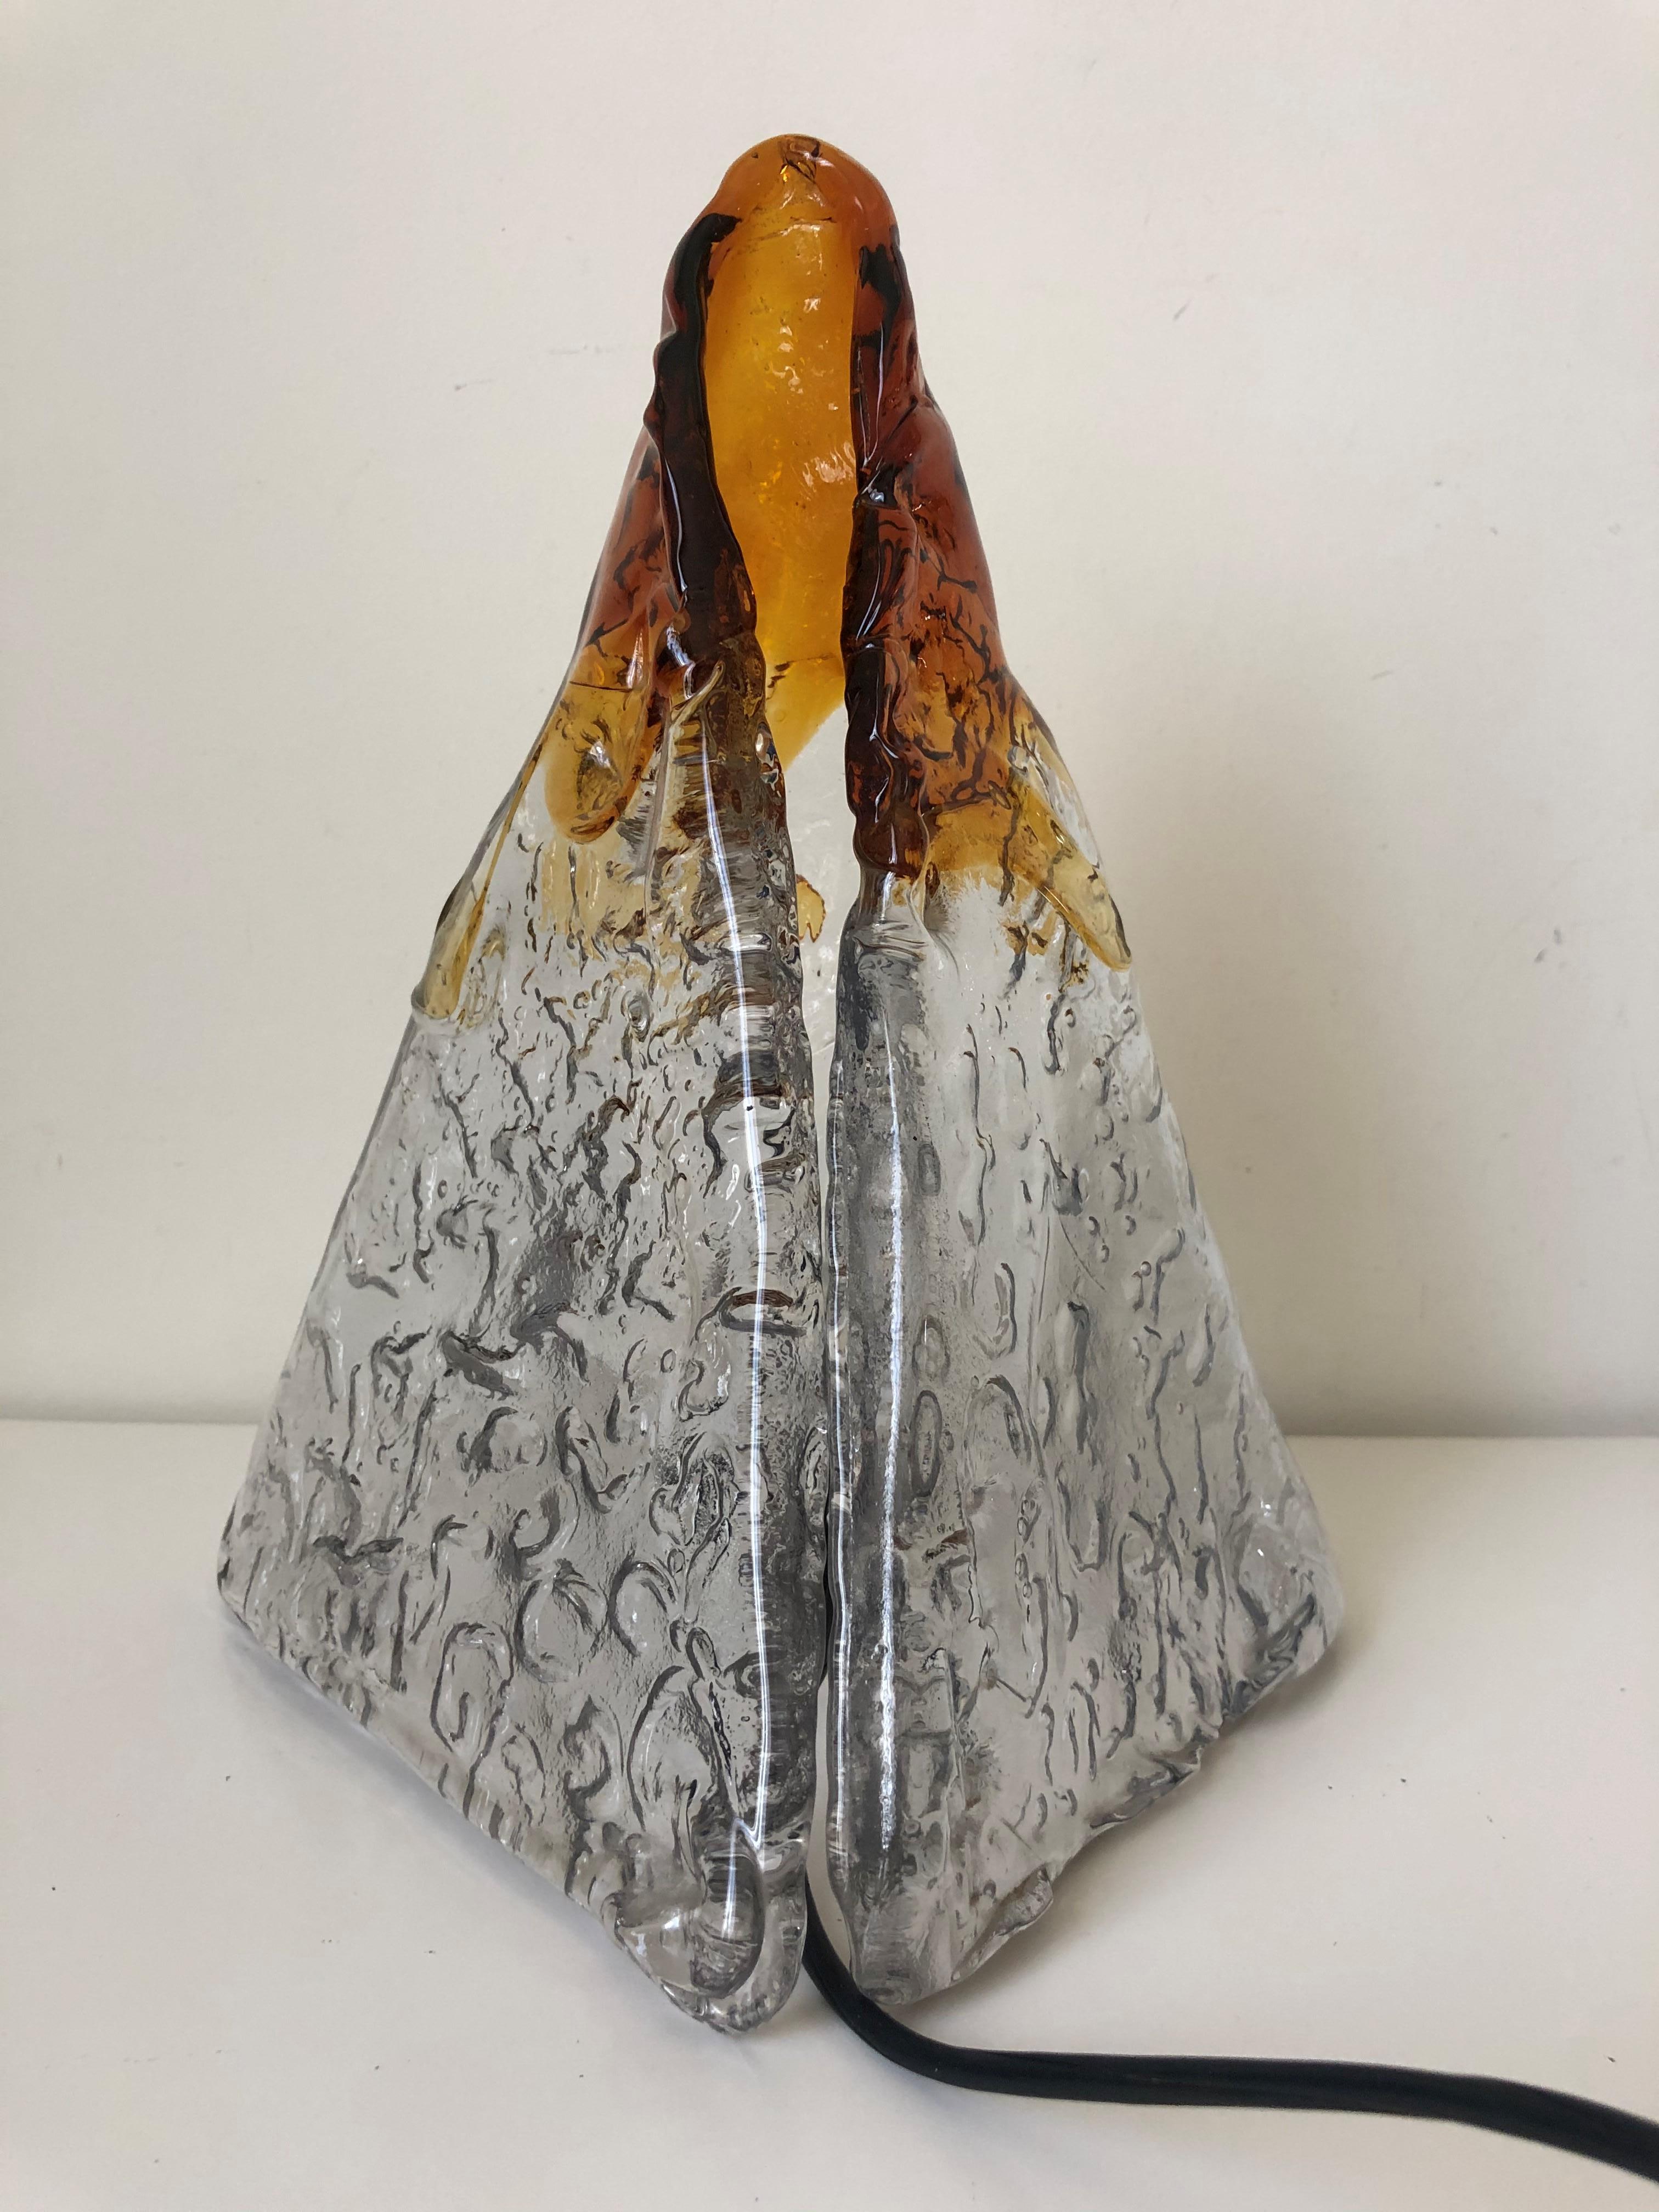 Pair of Midcentury Italian Pyramid Murano Table Lamps by Mazzega, 1970s For Sale 4